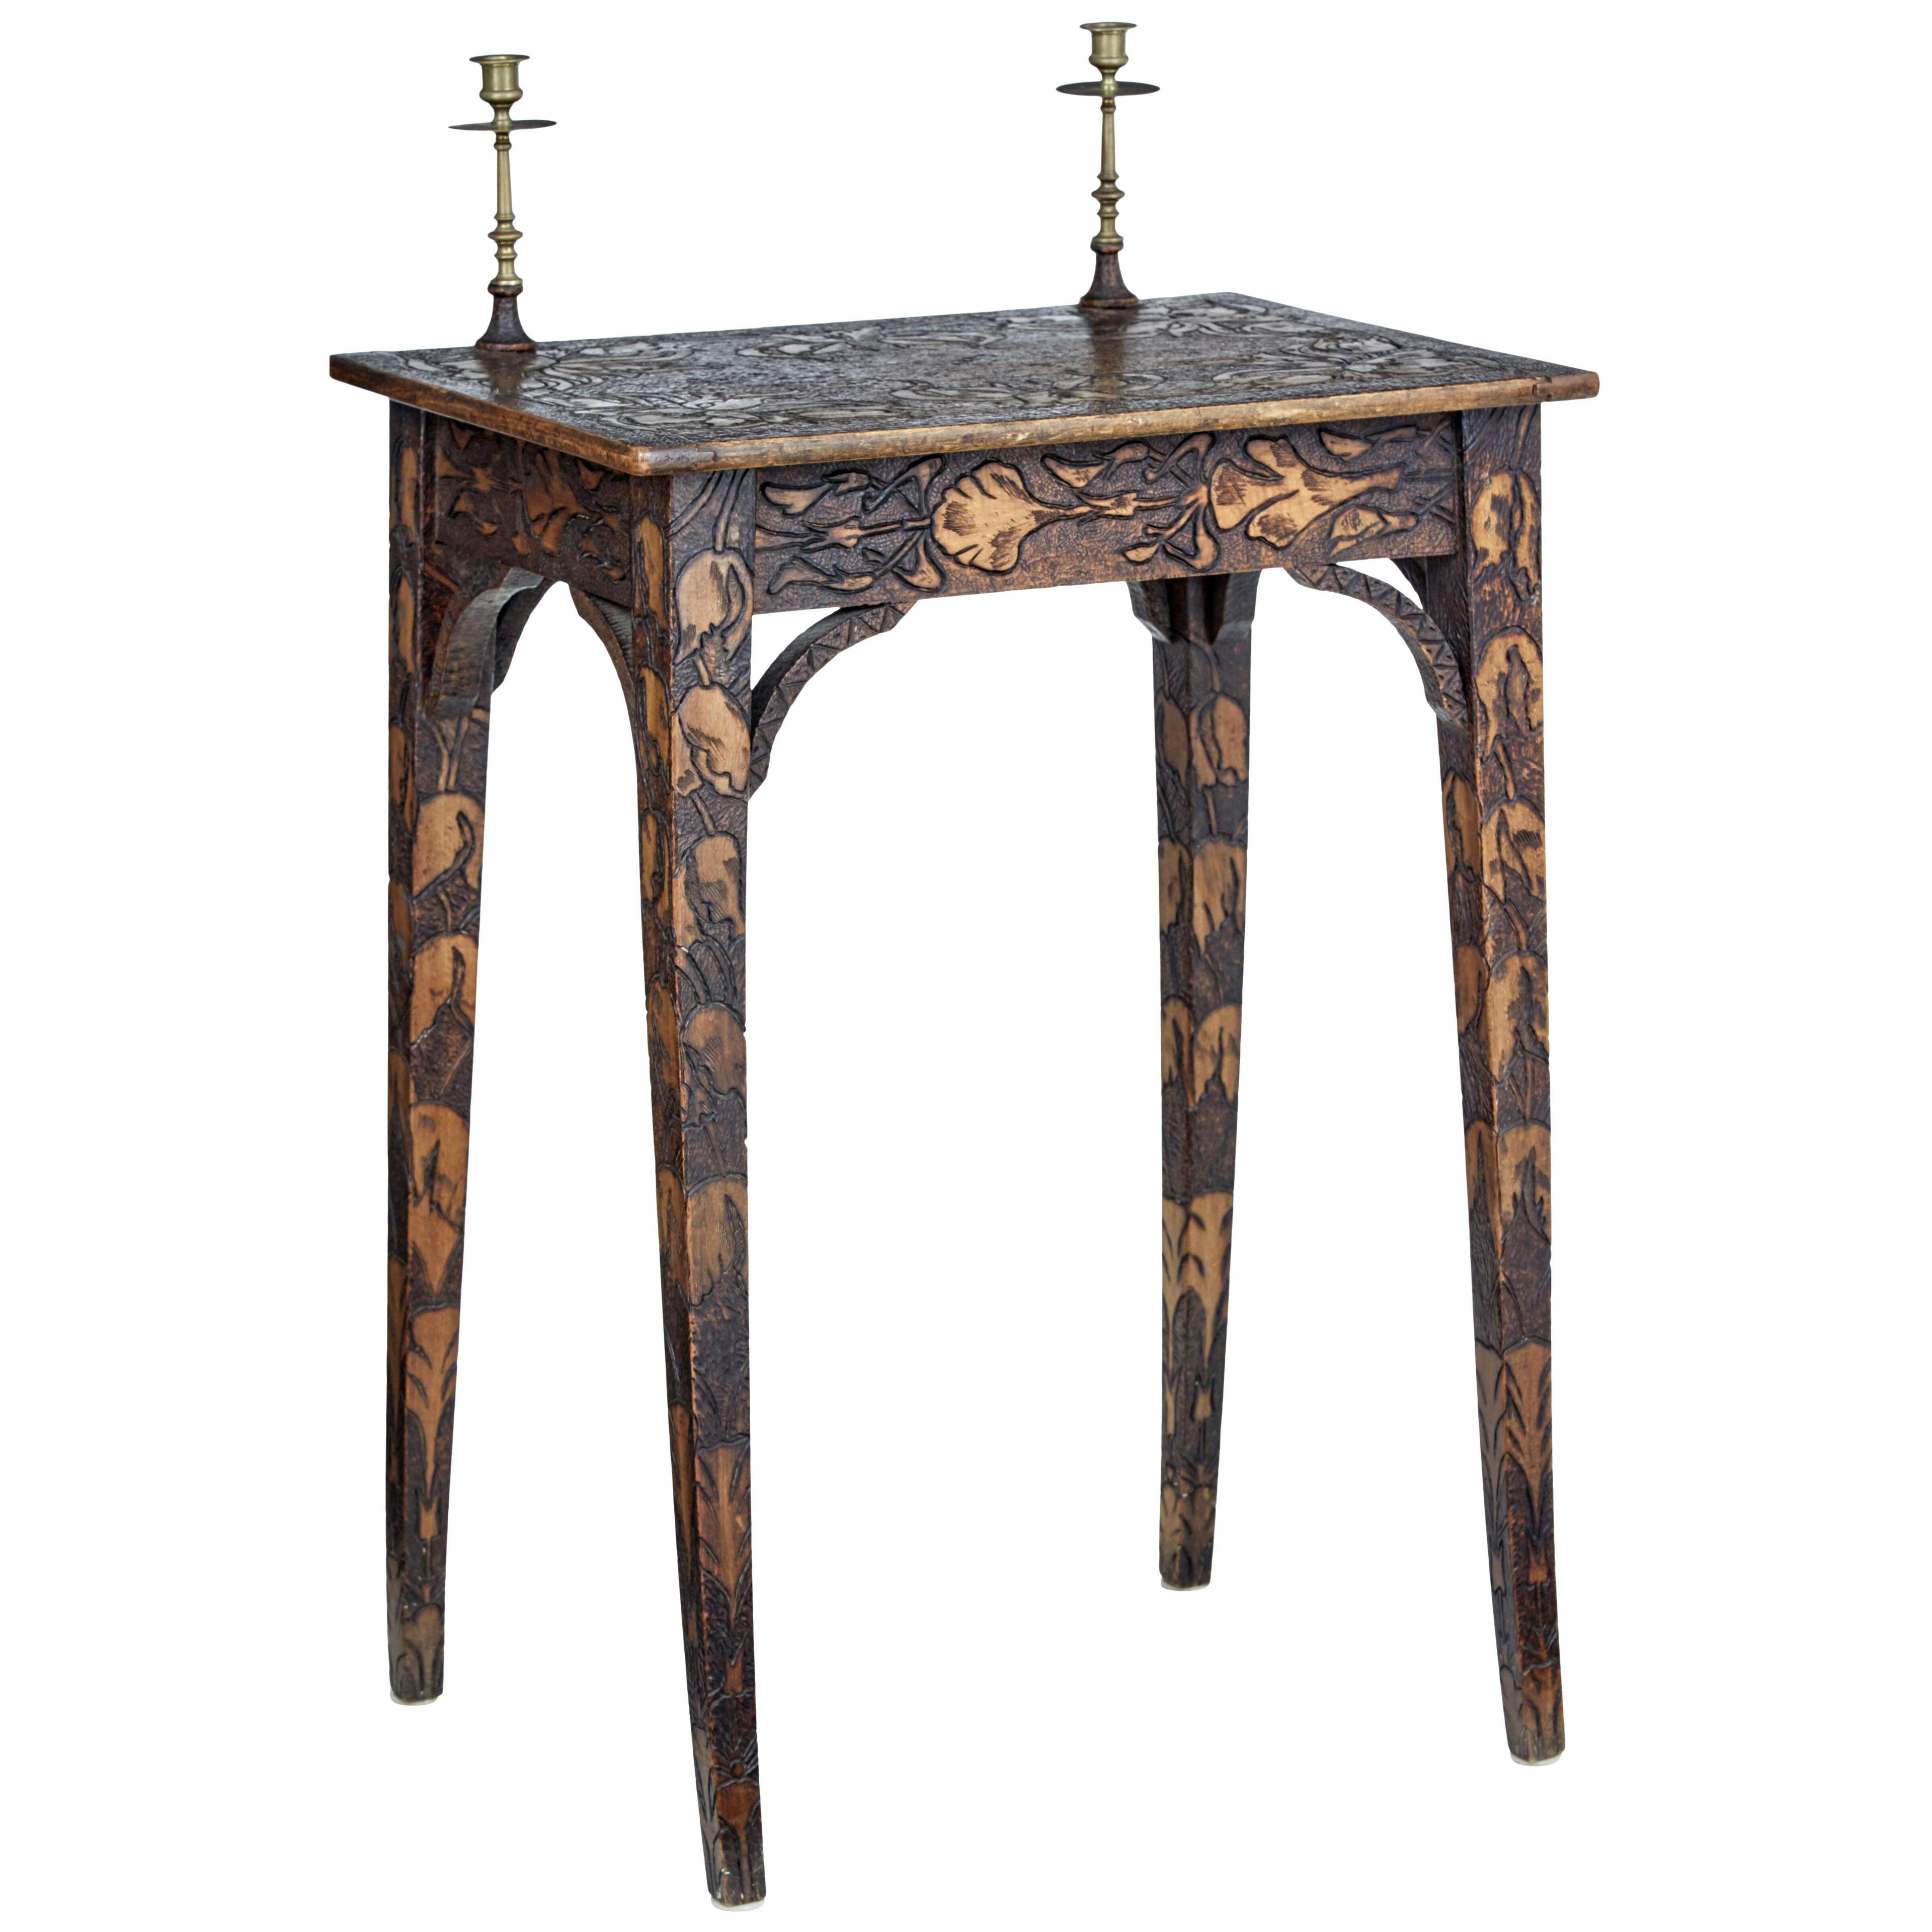 EARLY 20TH CENTURY FRENCH CARVED POKER WORK WRITING TABLE